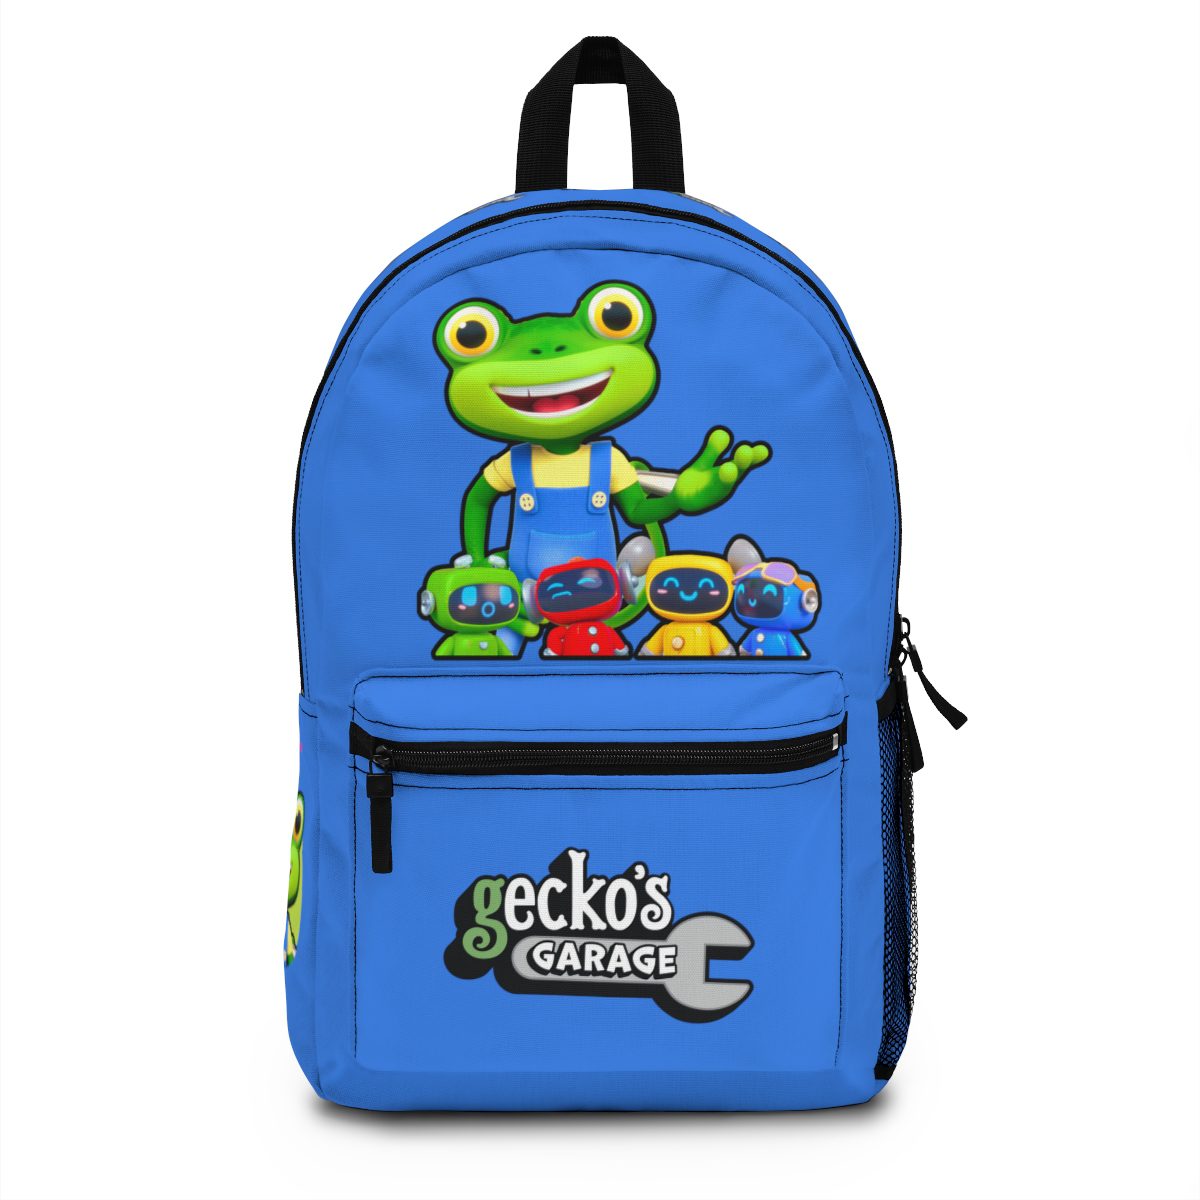 Blue Gecko’s Garage Animated Series Backpack – Adorable and Fun Cool Kiddo 10